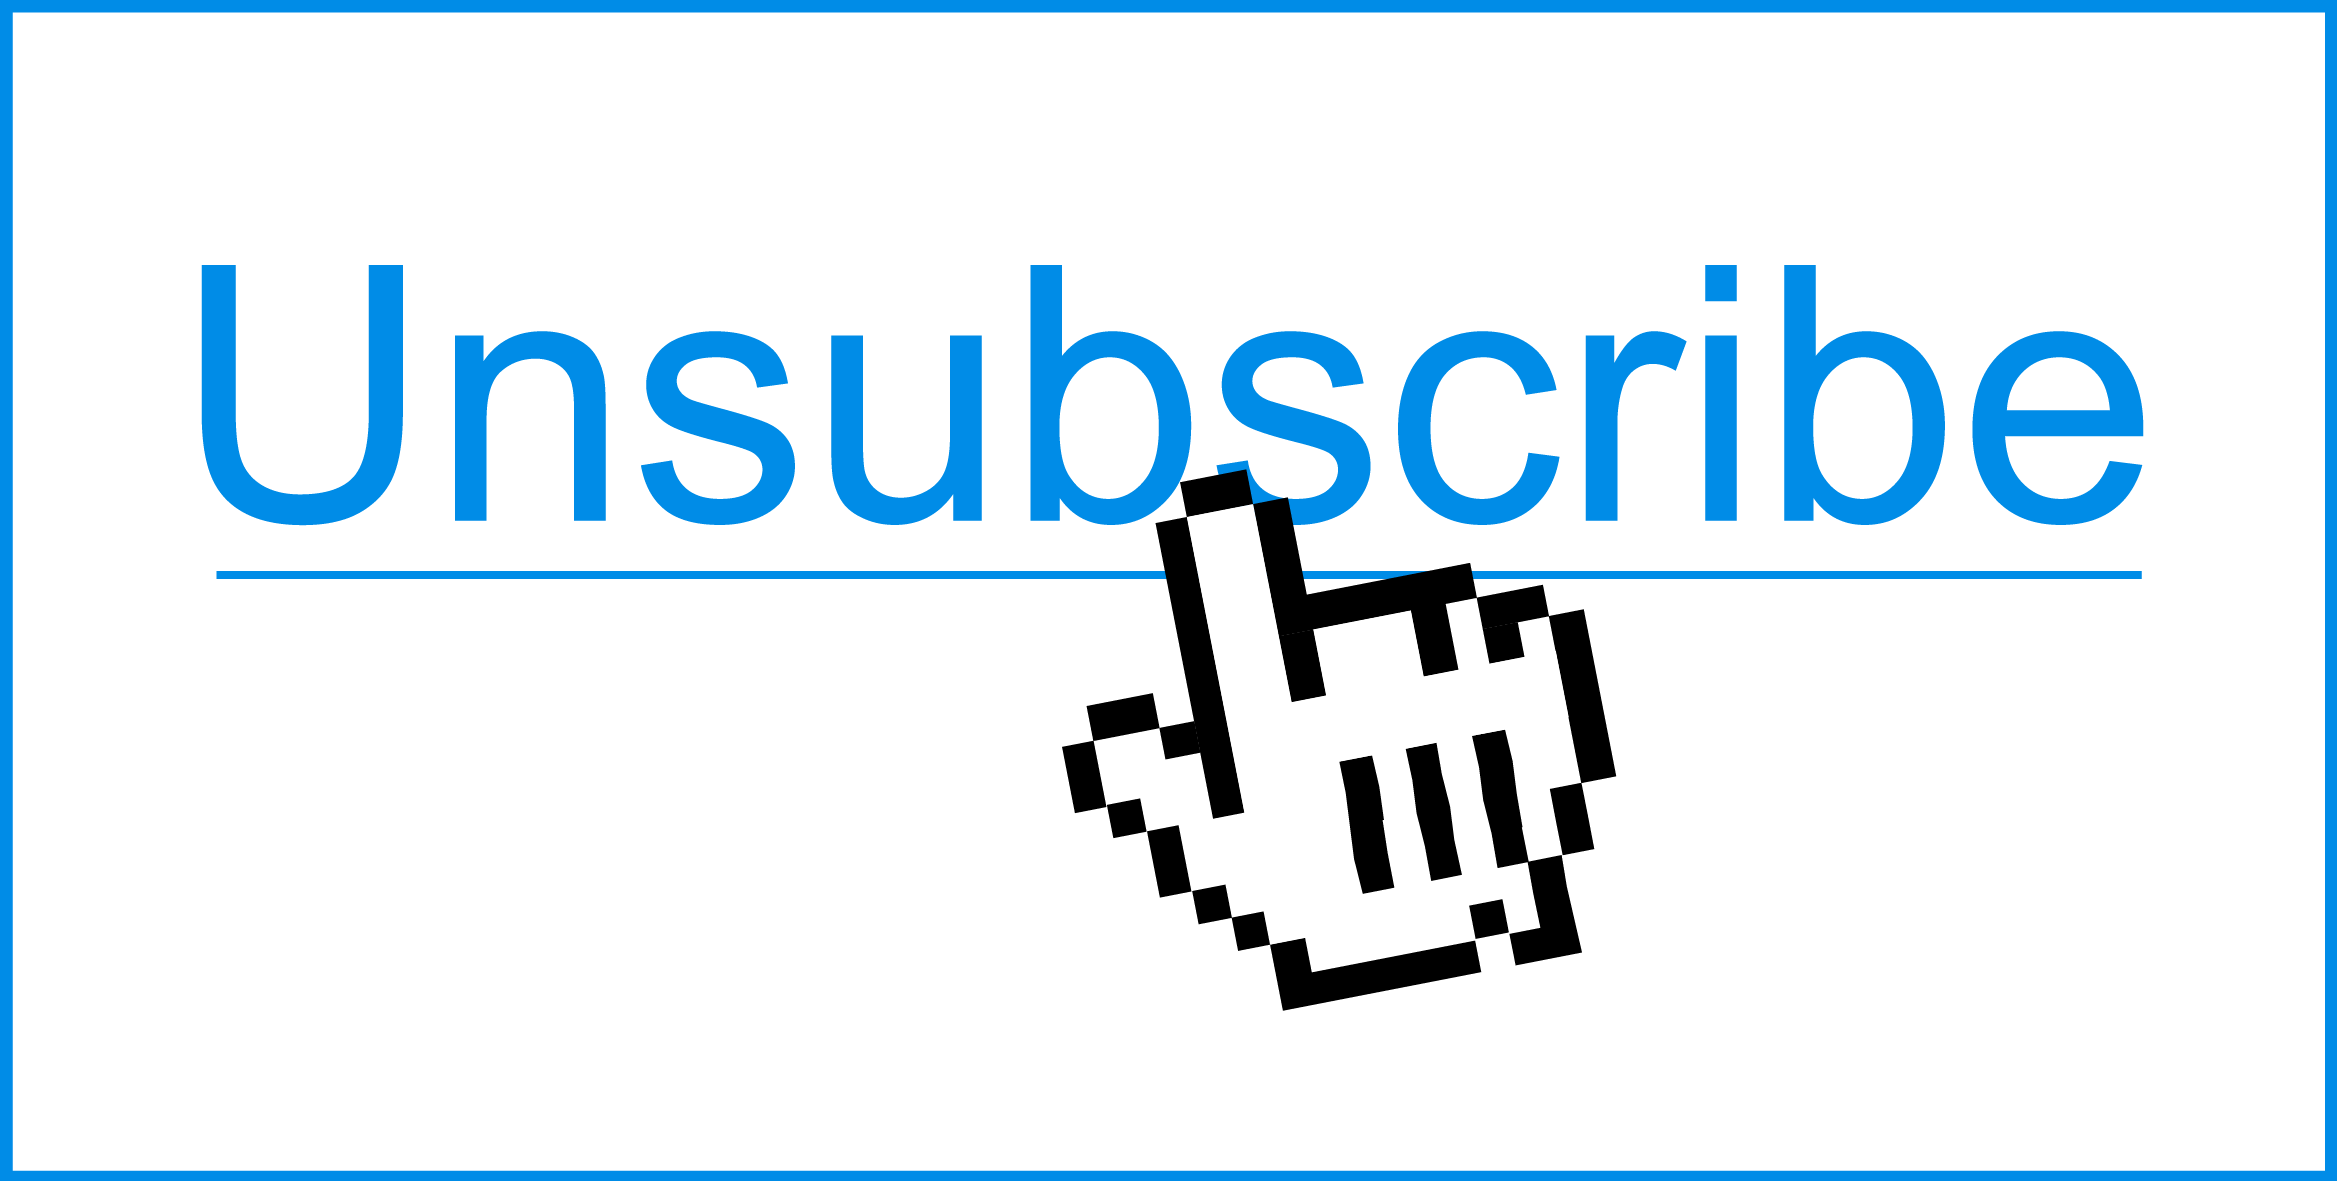 digital image of a cursor hand pointing at a hyperlinked "unsubscribe" word